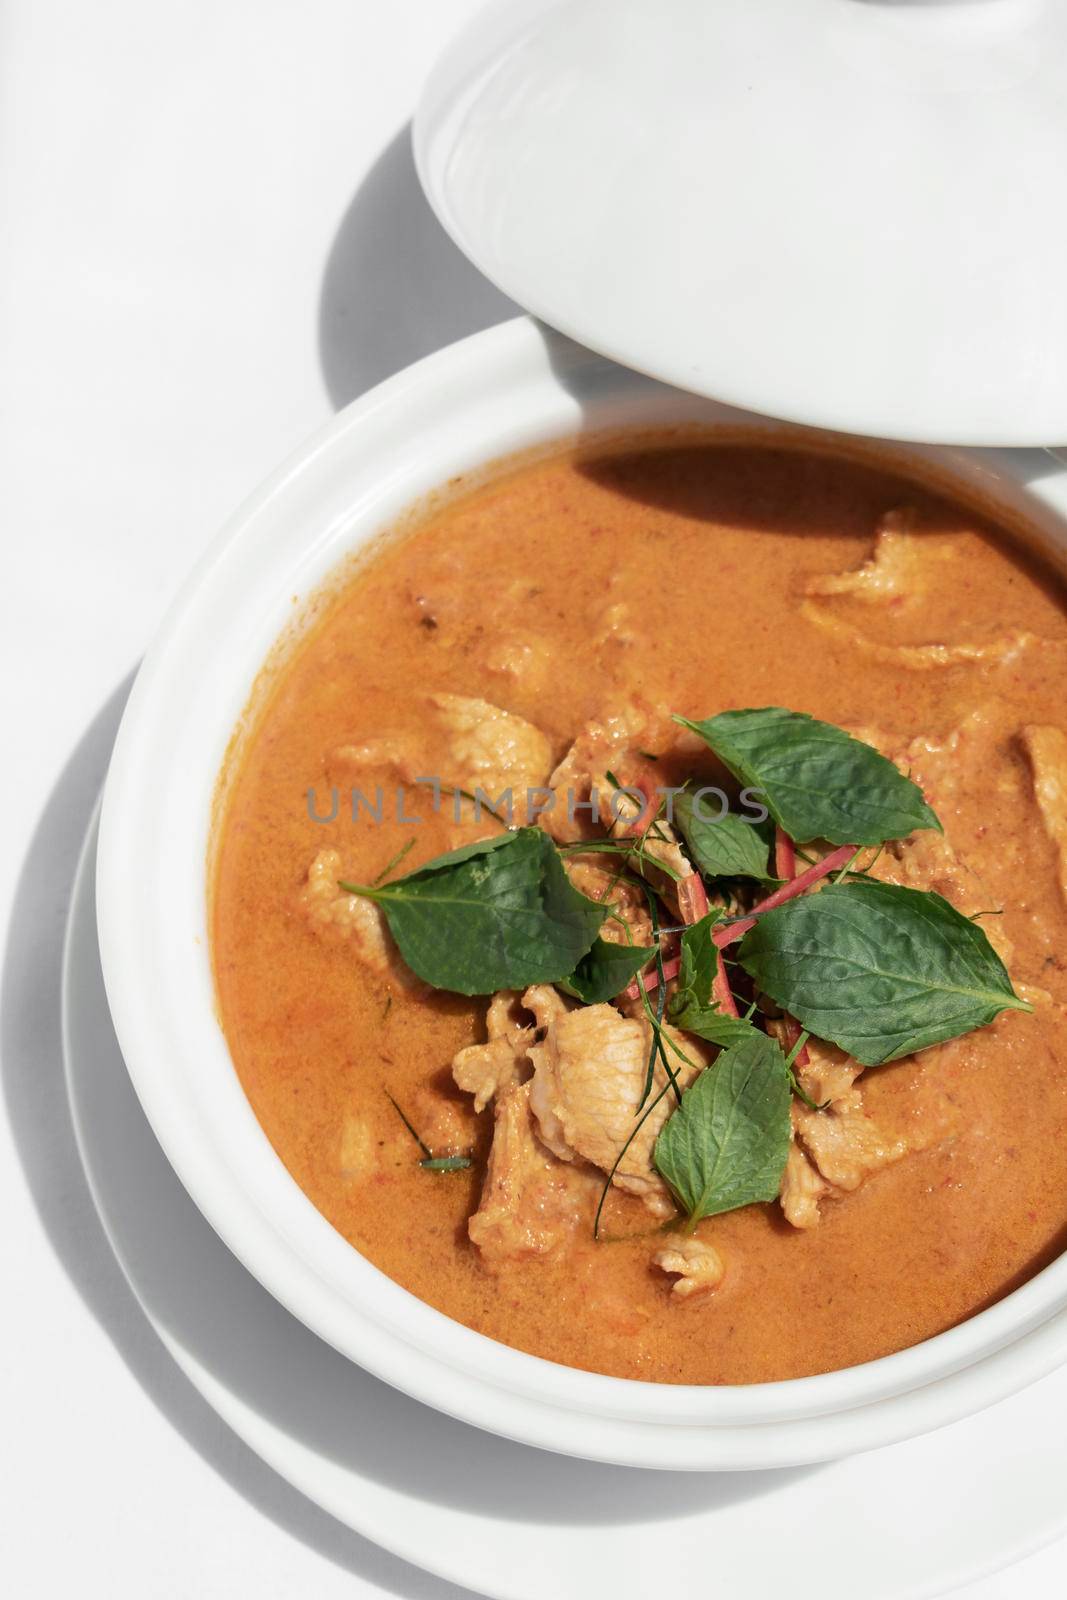 thai spicy panang pork curry with coconut milk on restaurant table in Phuket Thailand